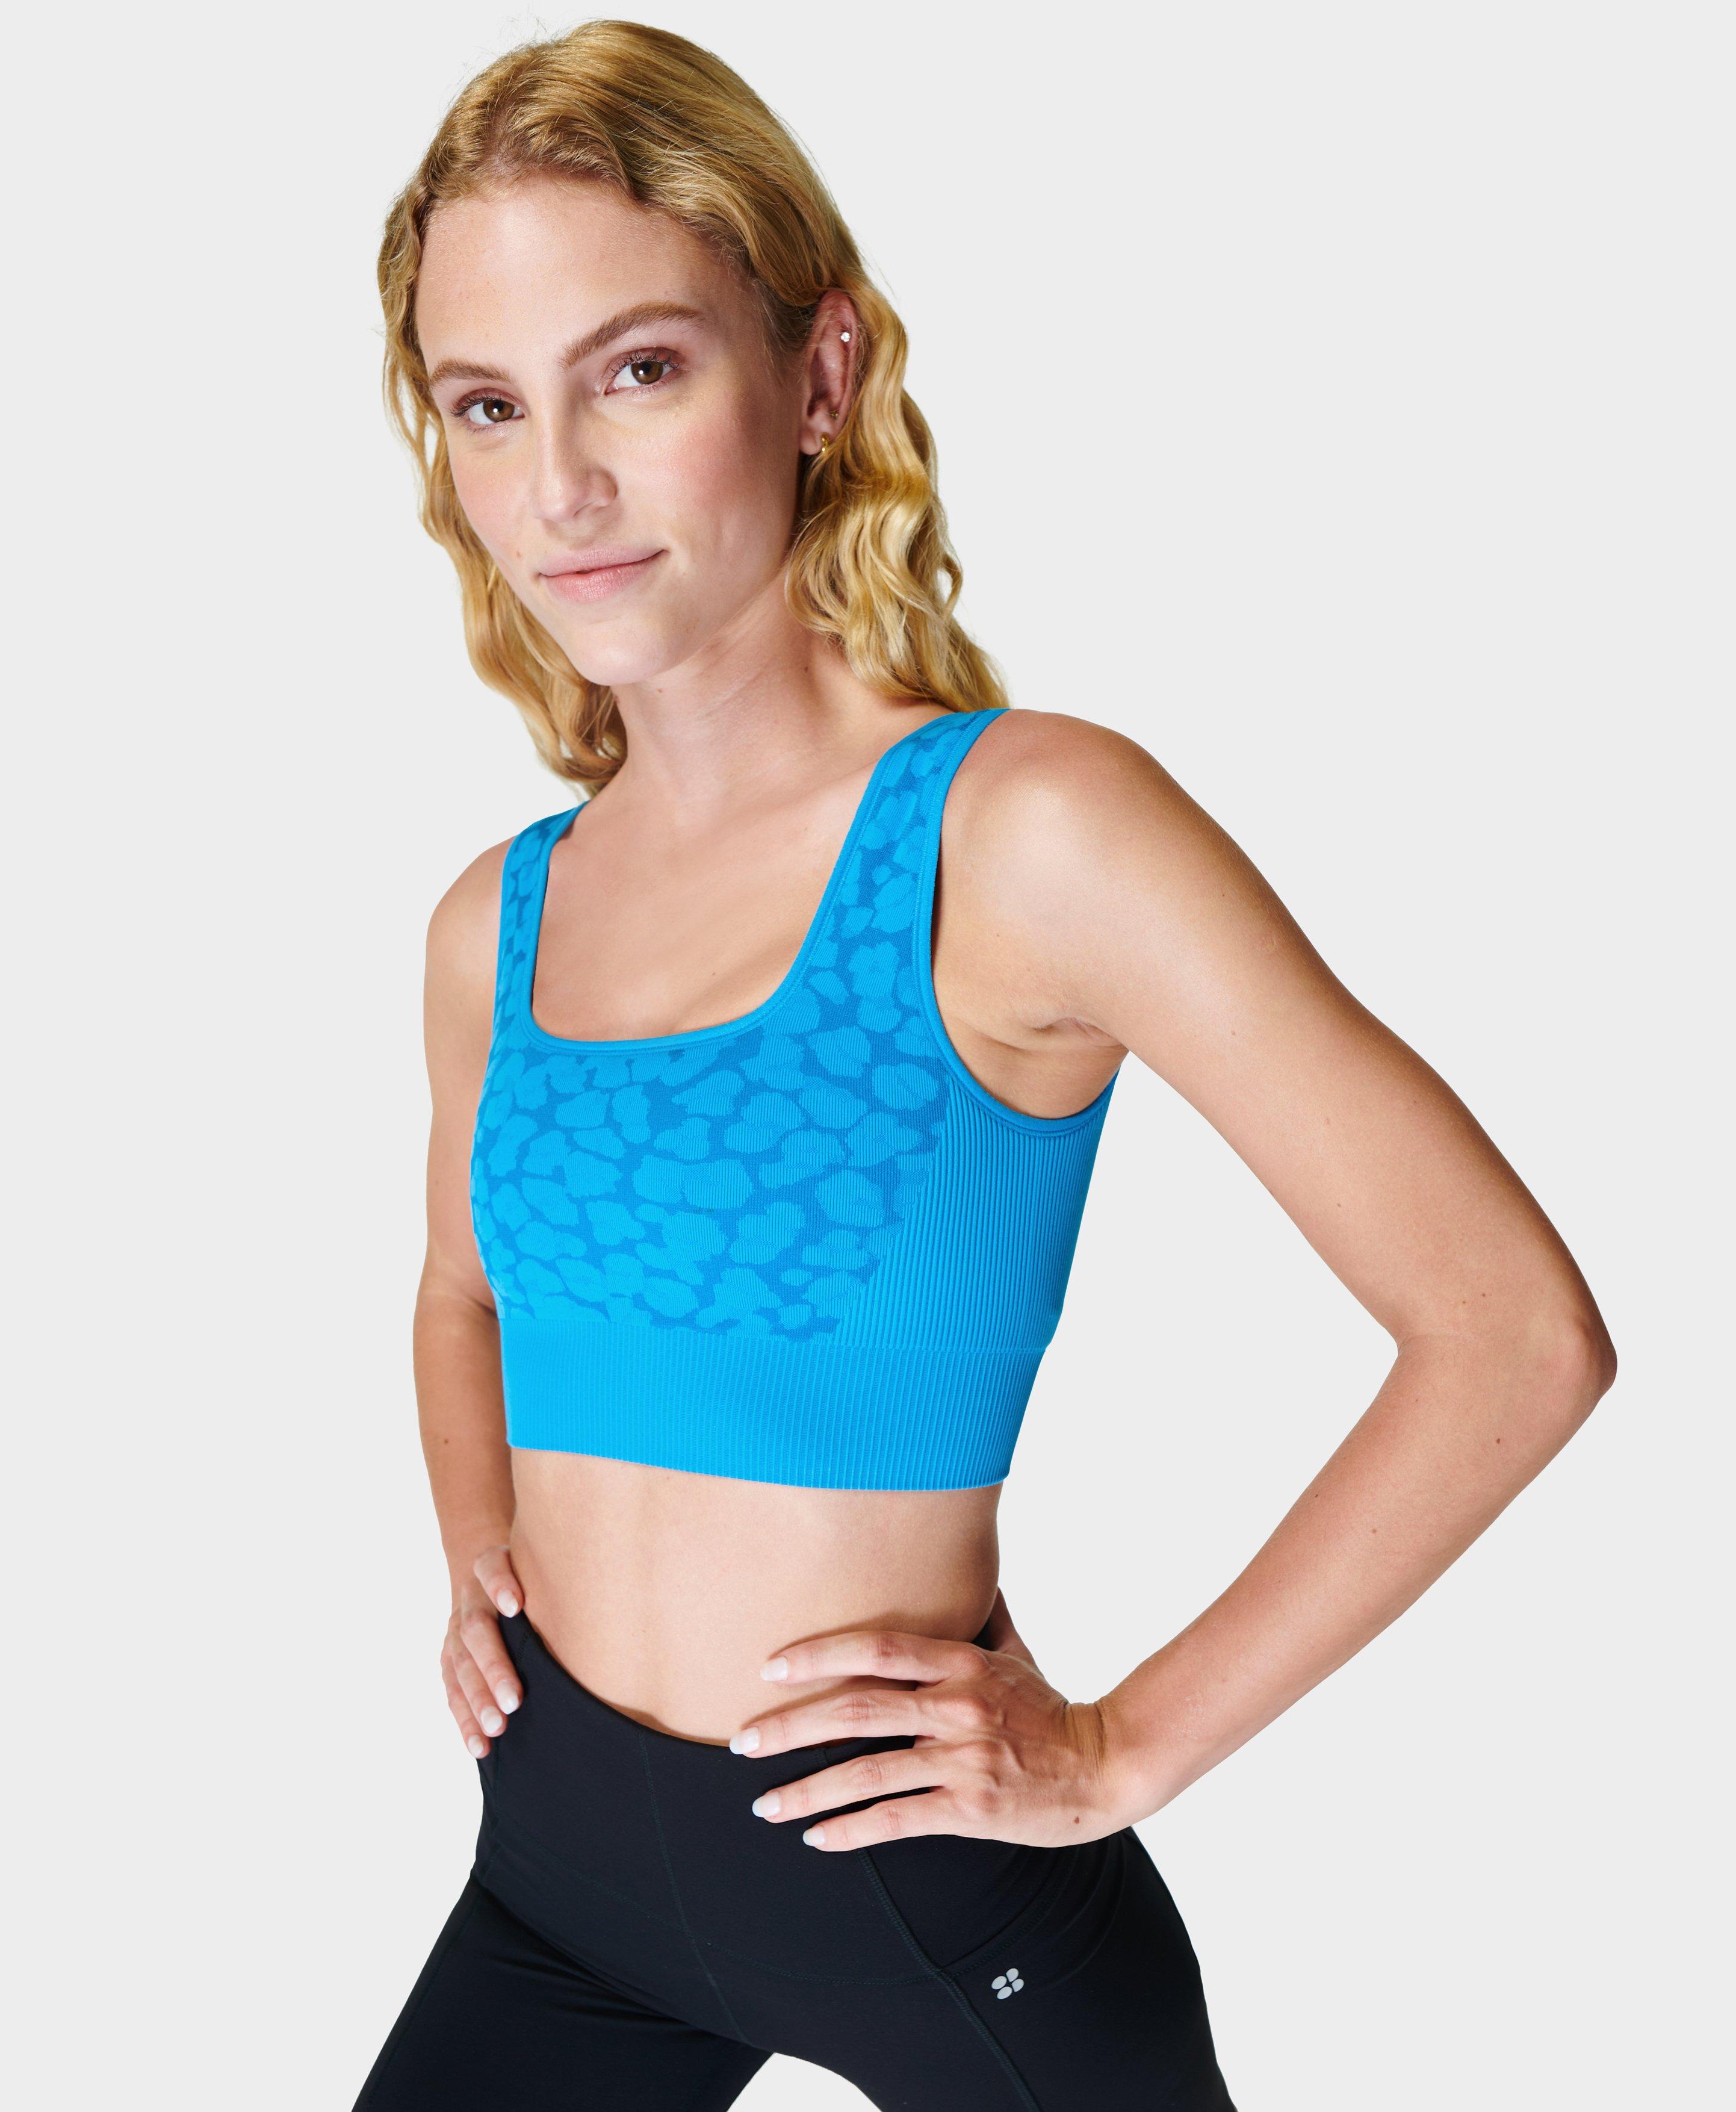 Sweaty Betty Sale - Shop up to 70% off